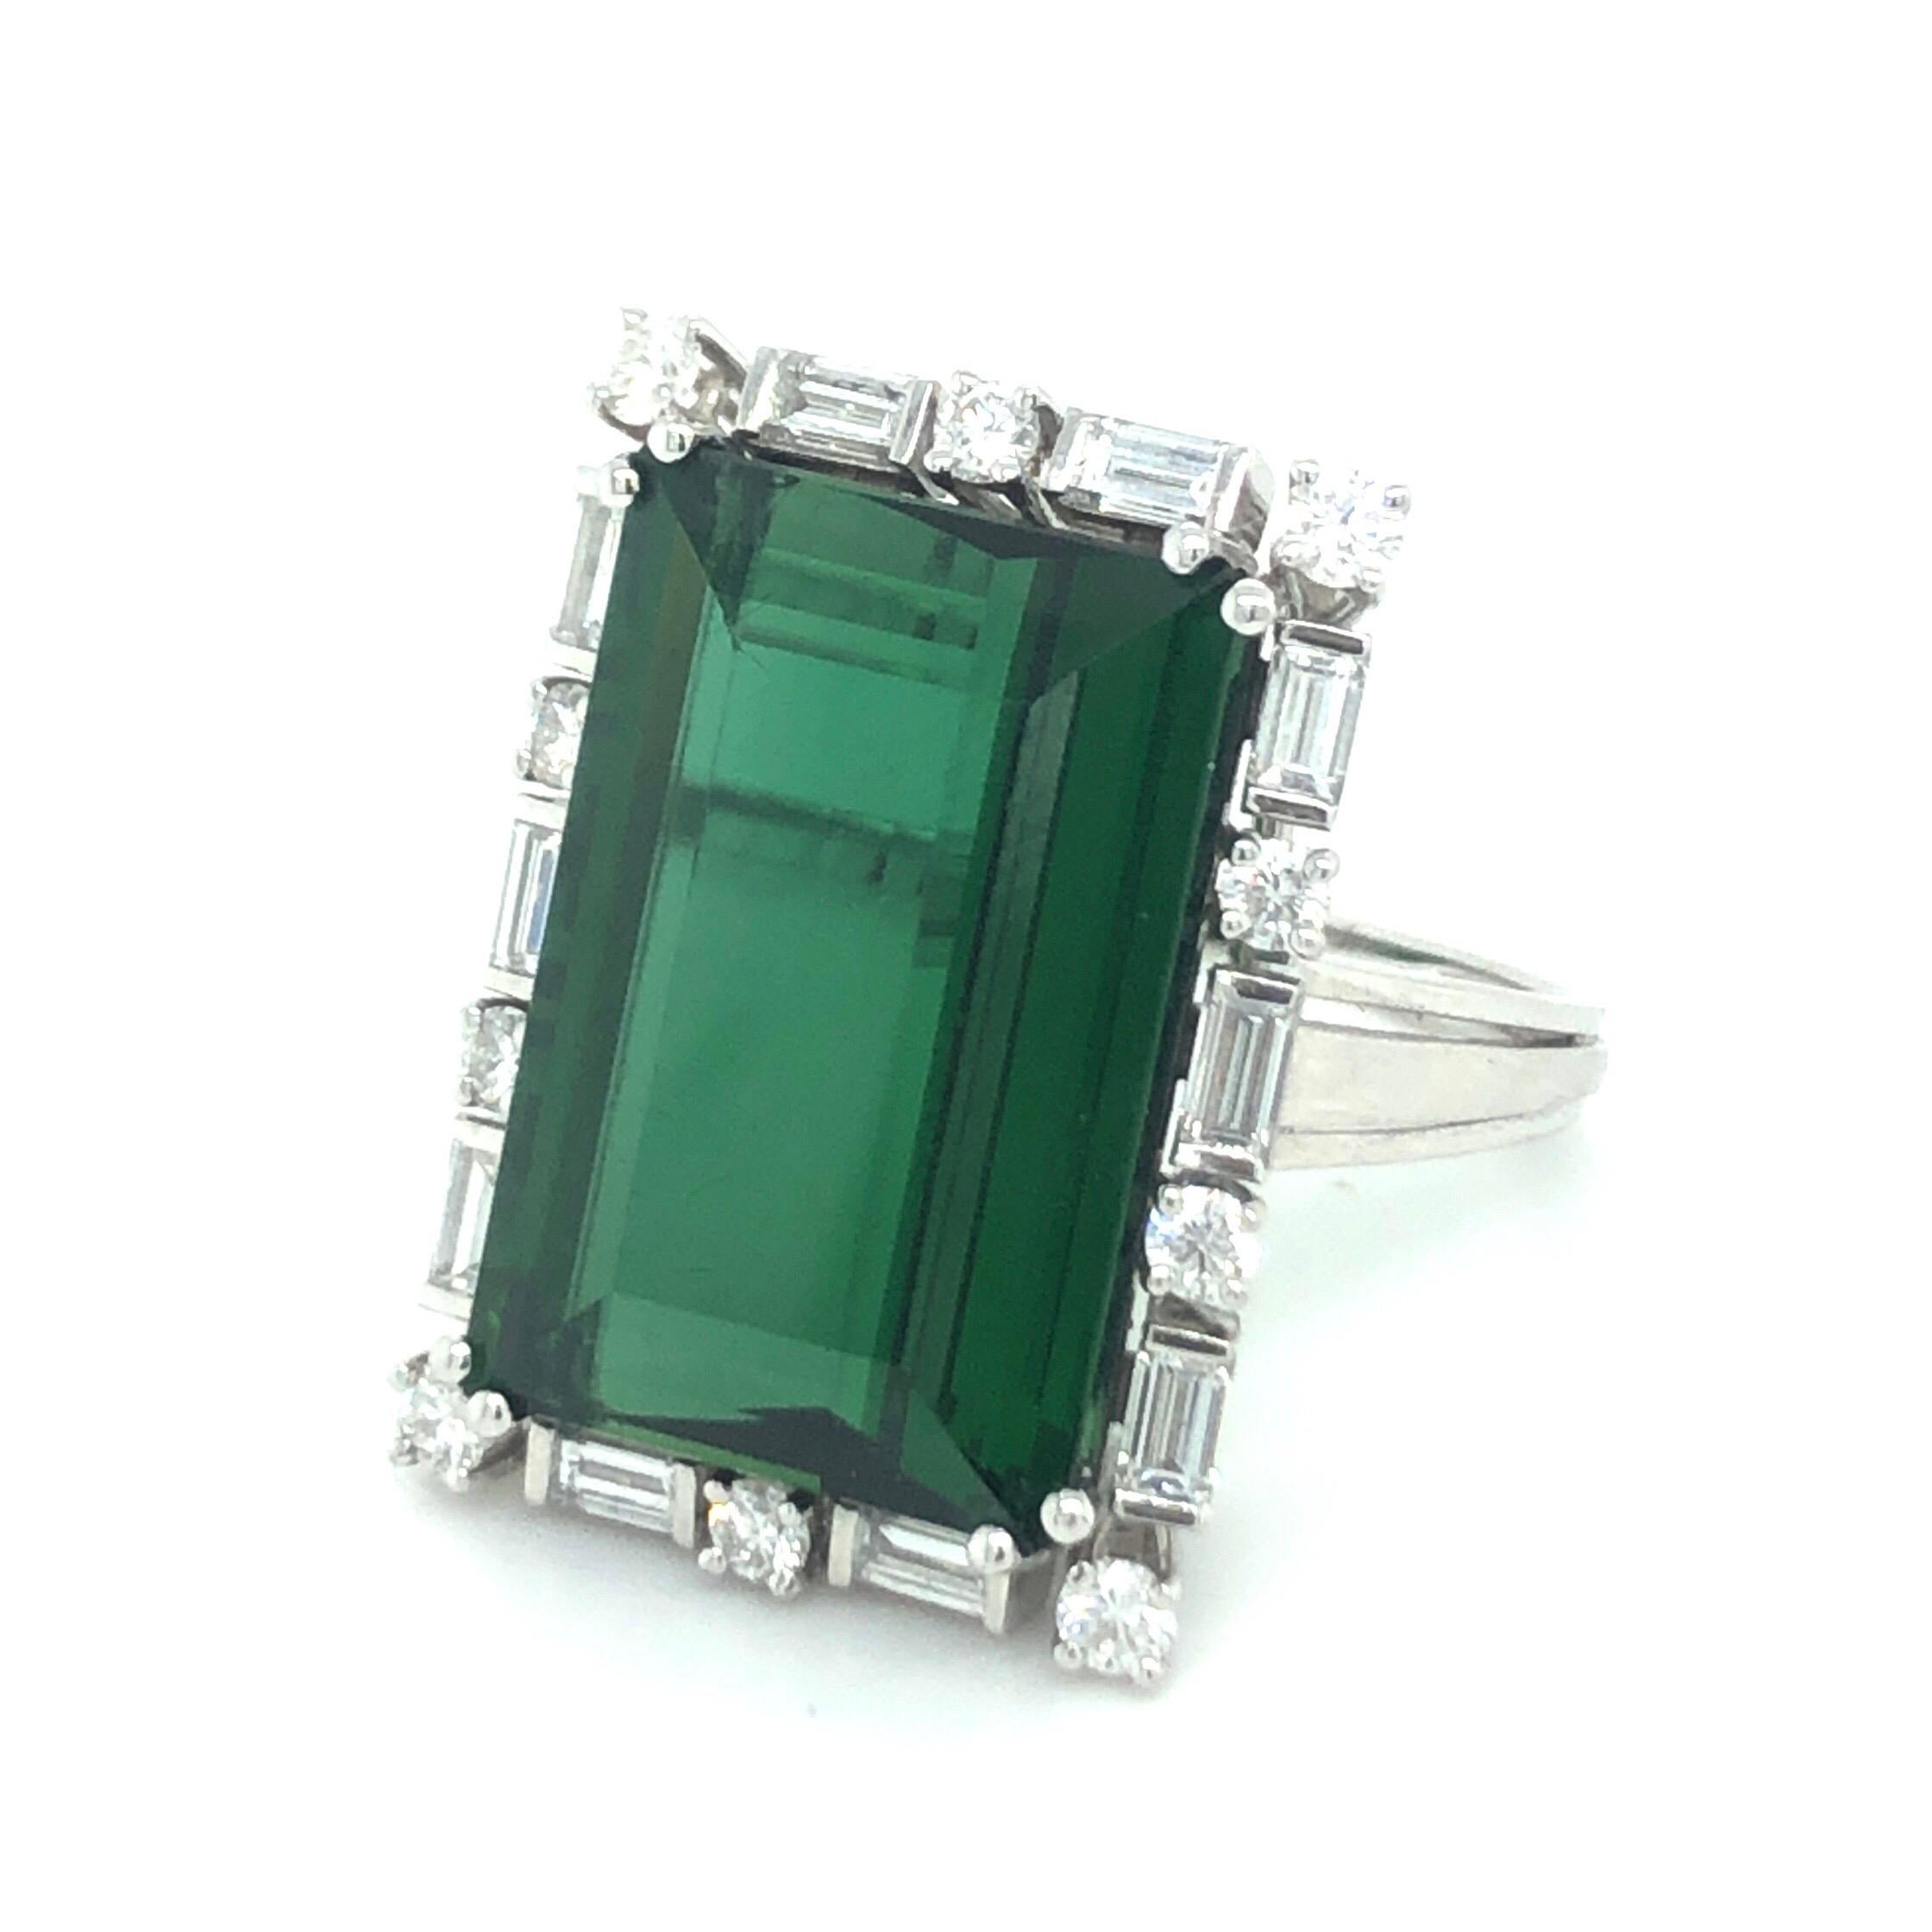 18 karat white gold and green tourmaline diamond dress/cocktail ring.
Spectacular cocktail ring set with a rectangular green tourmaline of circa 14.7 carats surrounded by a regularly arranged entourage of 10 brilliant-cut diamonds and 10